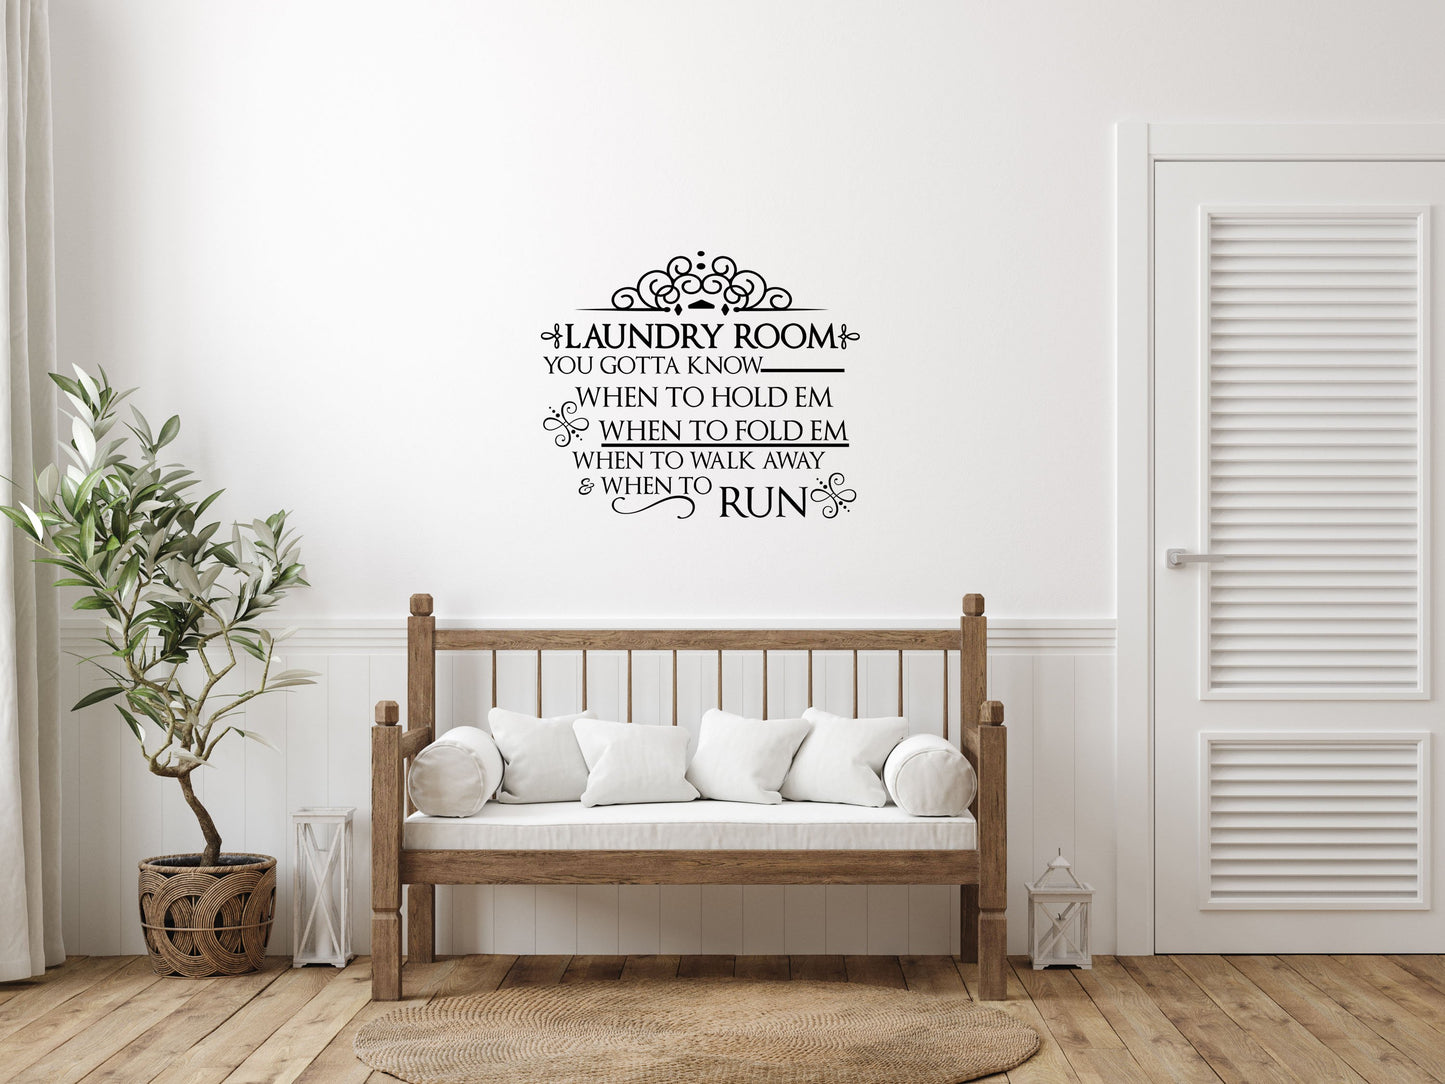 Laundry Room Decal - Inspirational Wall Decals Vinyl Wall Decal Done 